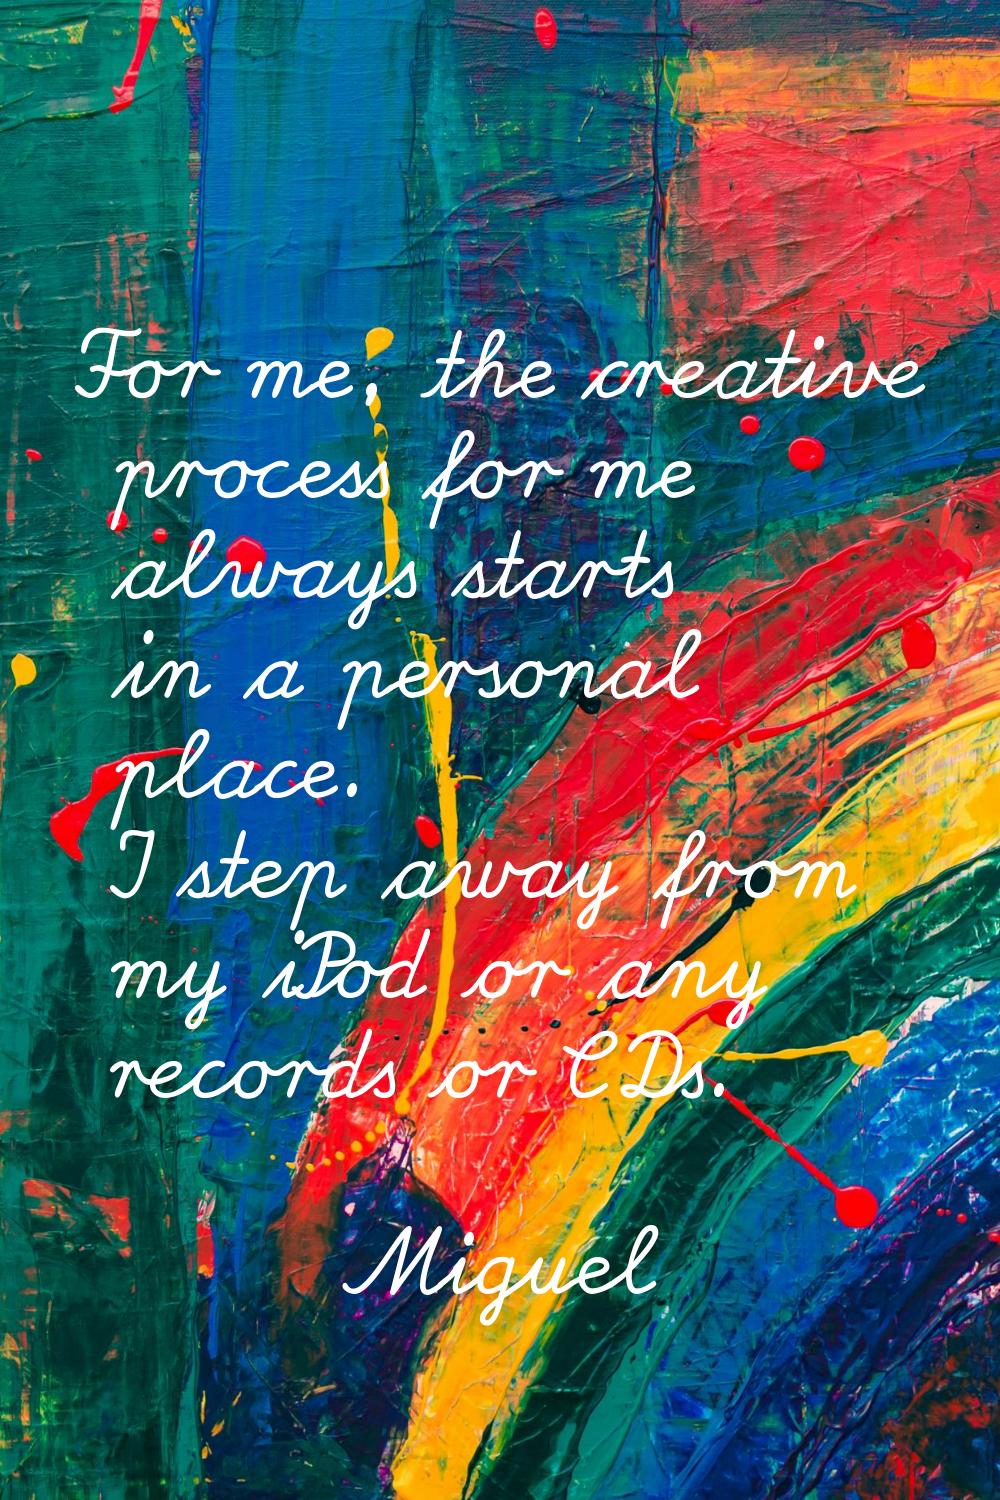 For me, the creative process for me always starts in a personal place. I step away from my iPod or 